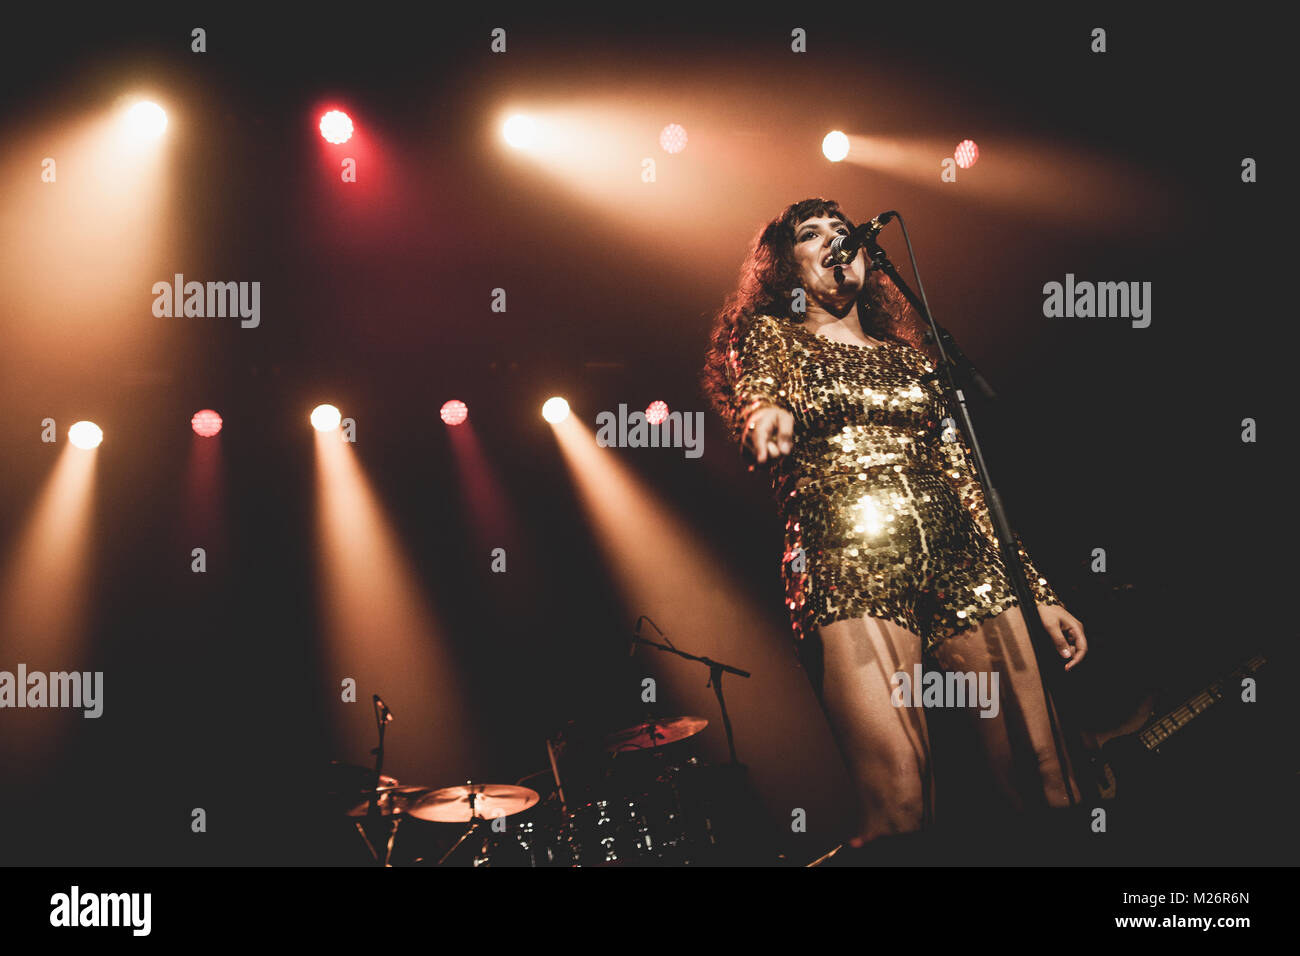 Soul singer and diva Coco from the Danish band Quadron is here pictured  singing live on stage at Vega in Copenhagen. Denmark 2013 Stock Photo -  Alamy